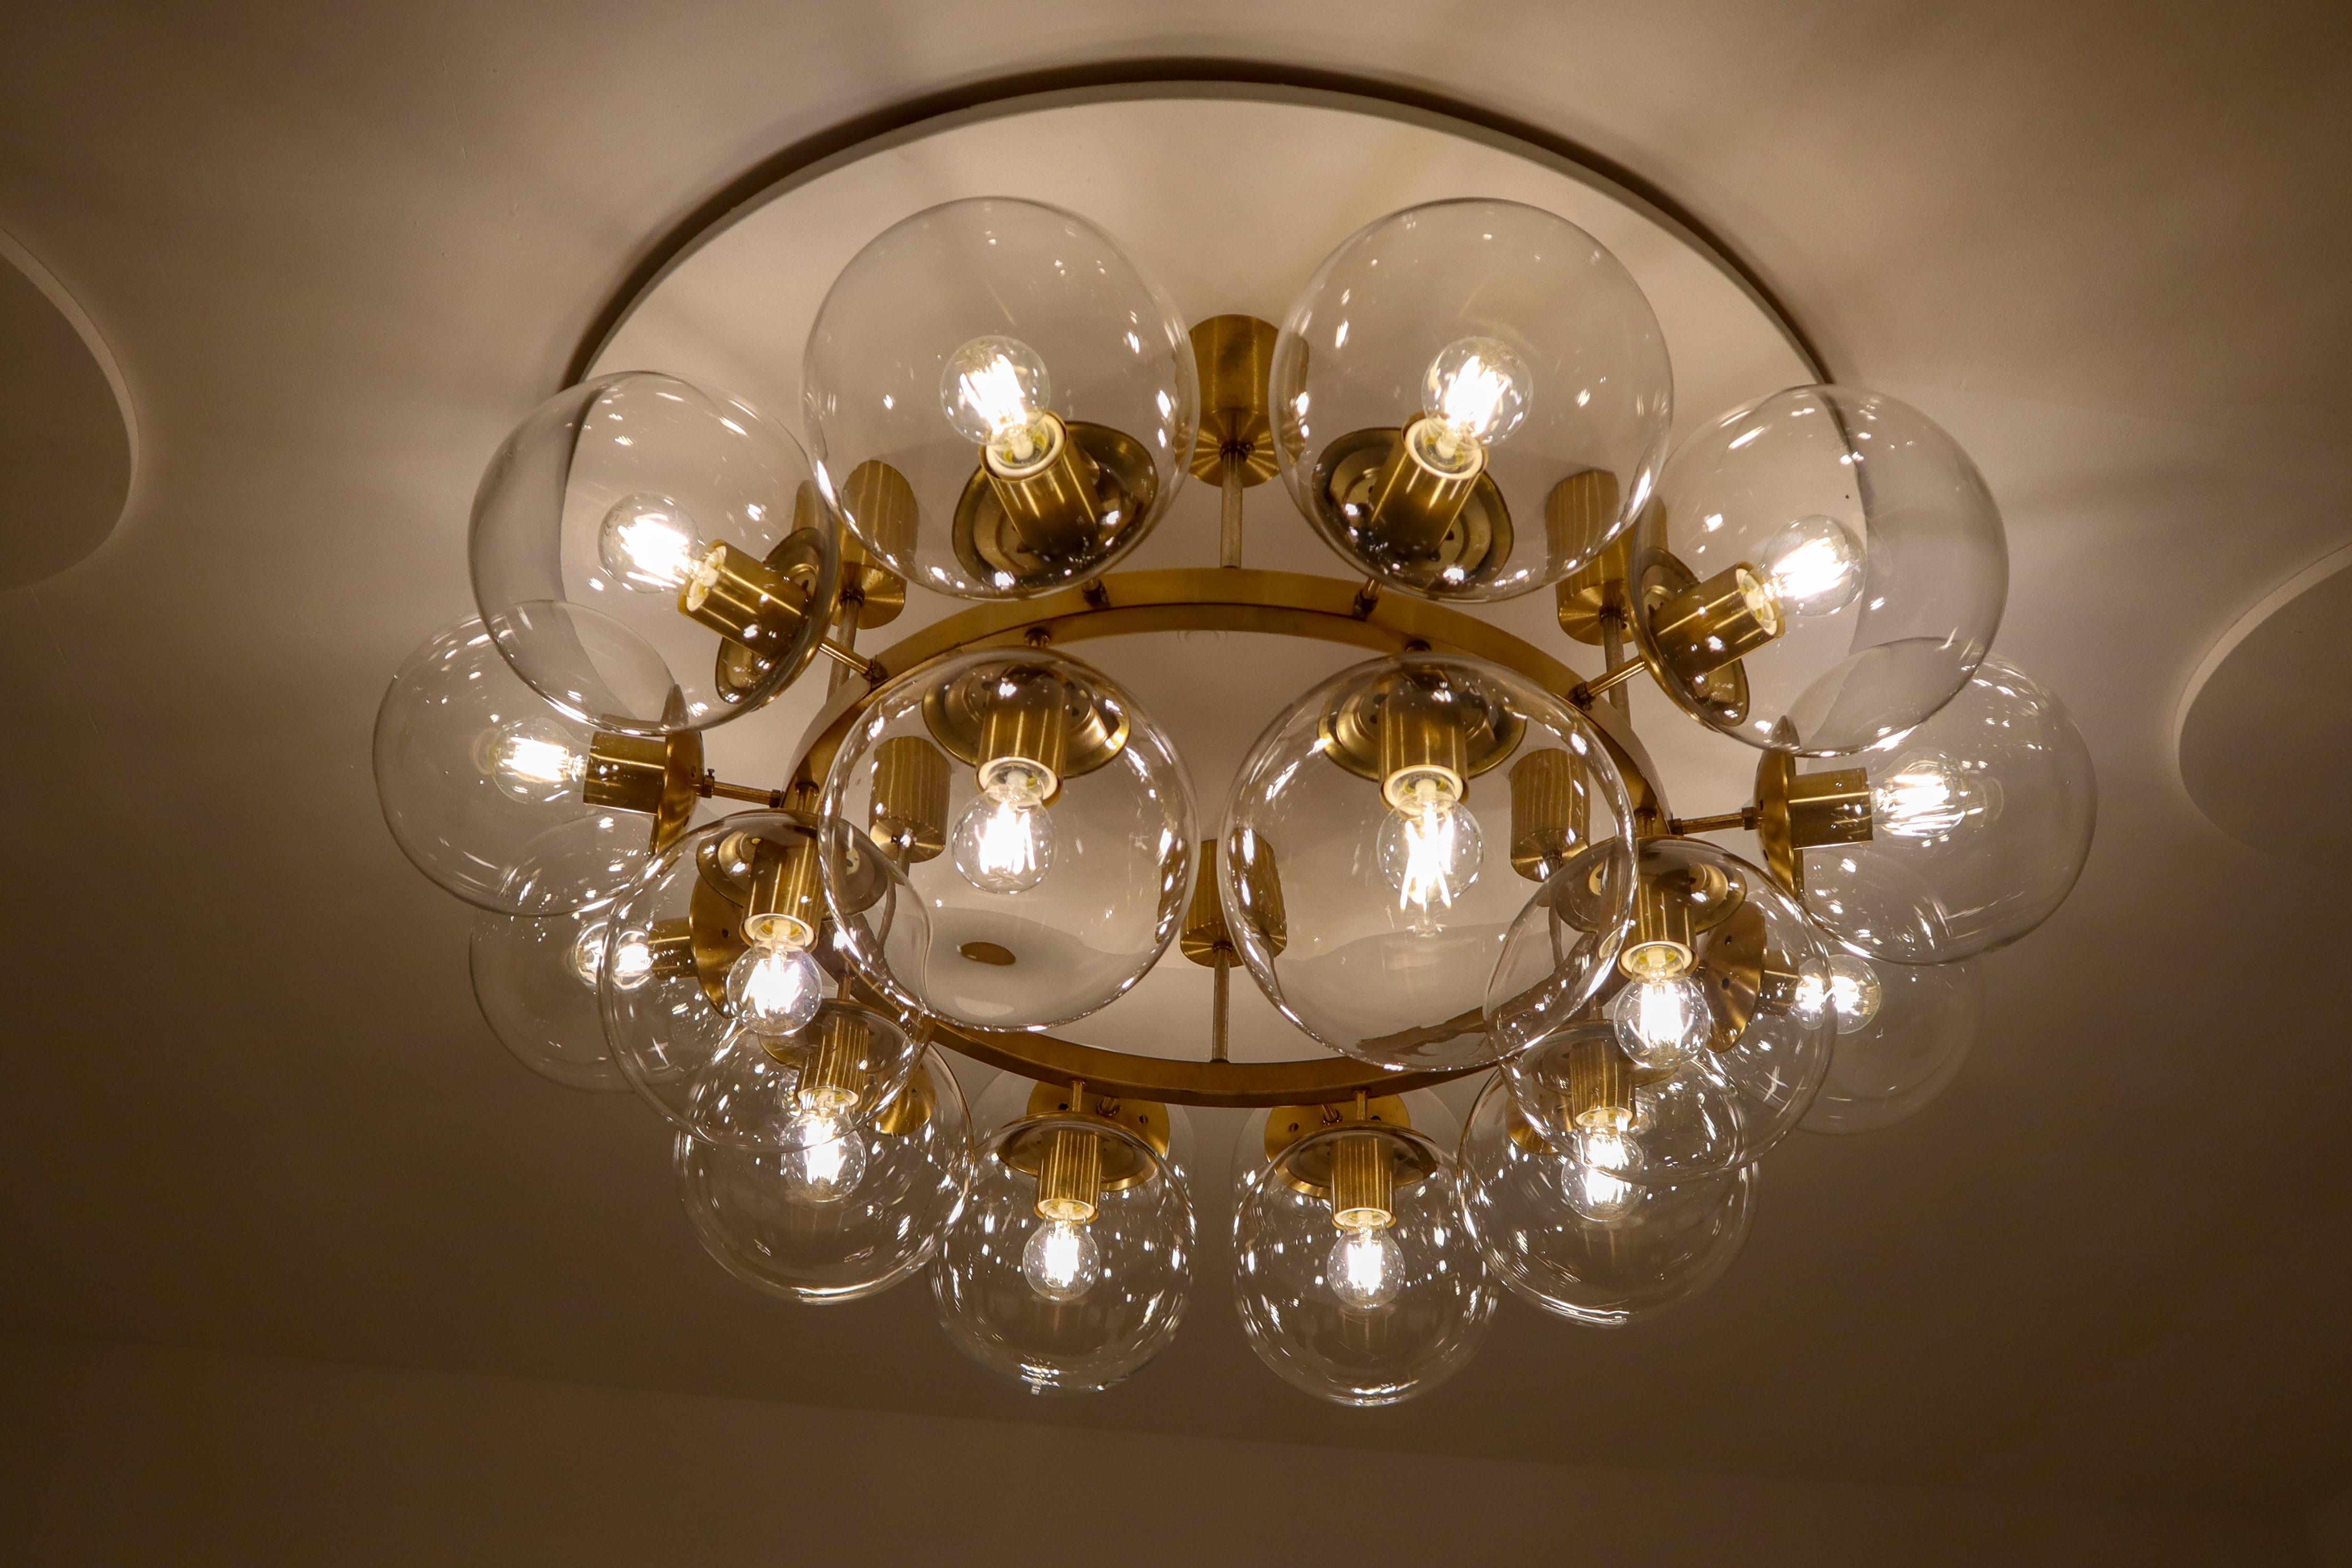 Large Hotel Chandelier in Brass Fixture and 20 Large Hand-Blowed Glass Globes  2